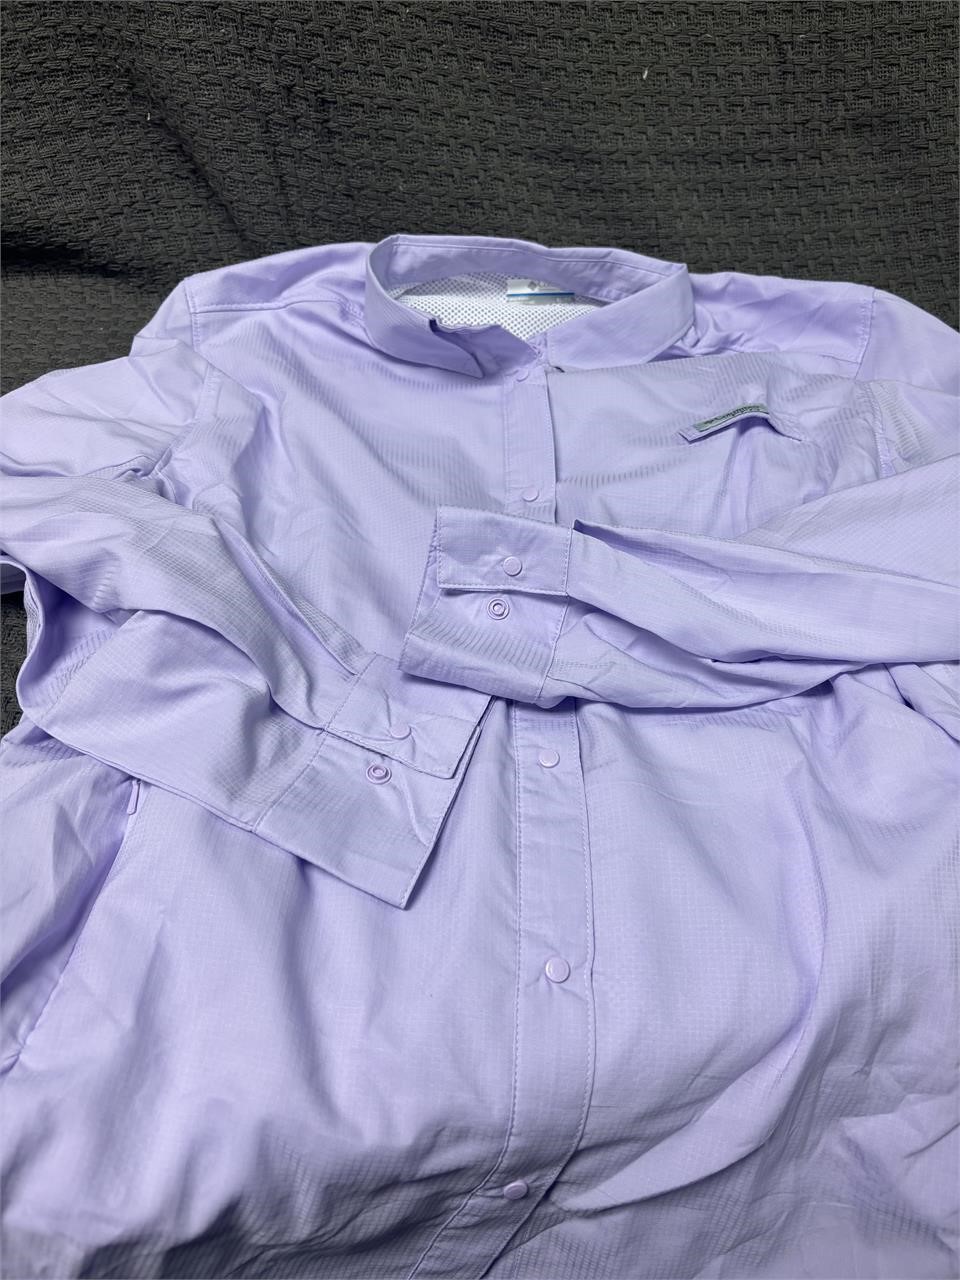 Columbia XL button up